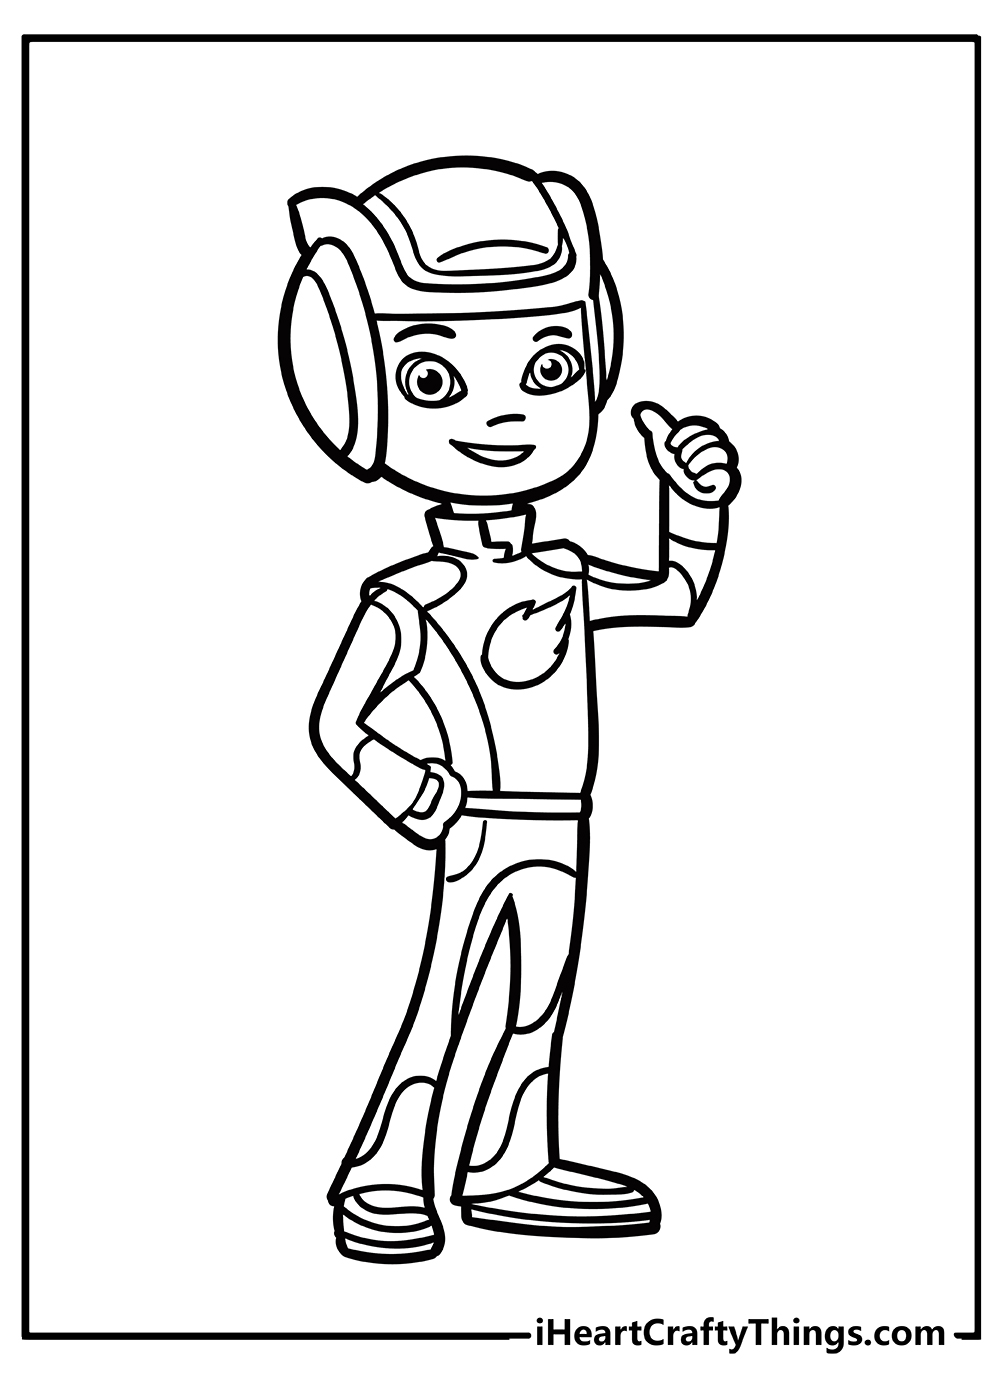 Blaze Coloring Pages for preschoolers free printable